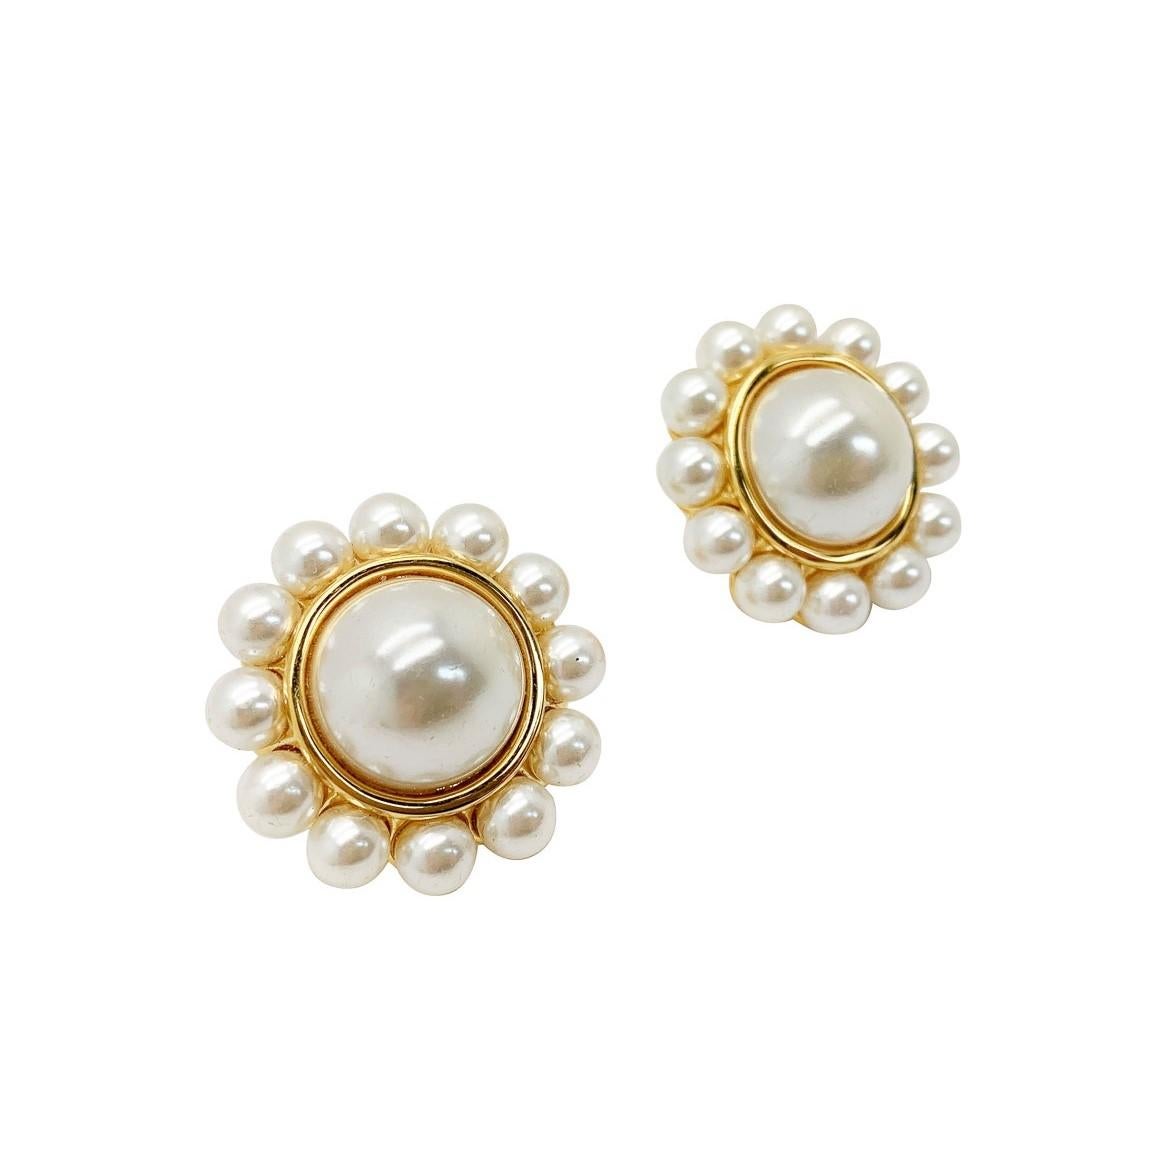 Sublime vintage Napier pearl earrings. Boasting oodles of pearl glam with a large central half pearl with a full pearl halo. The quintessential pearl earring you’ll reach for time after time.

Vintage Condition: Very good without damage or